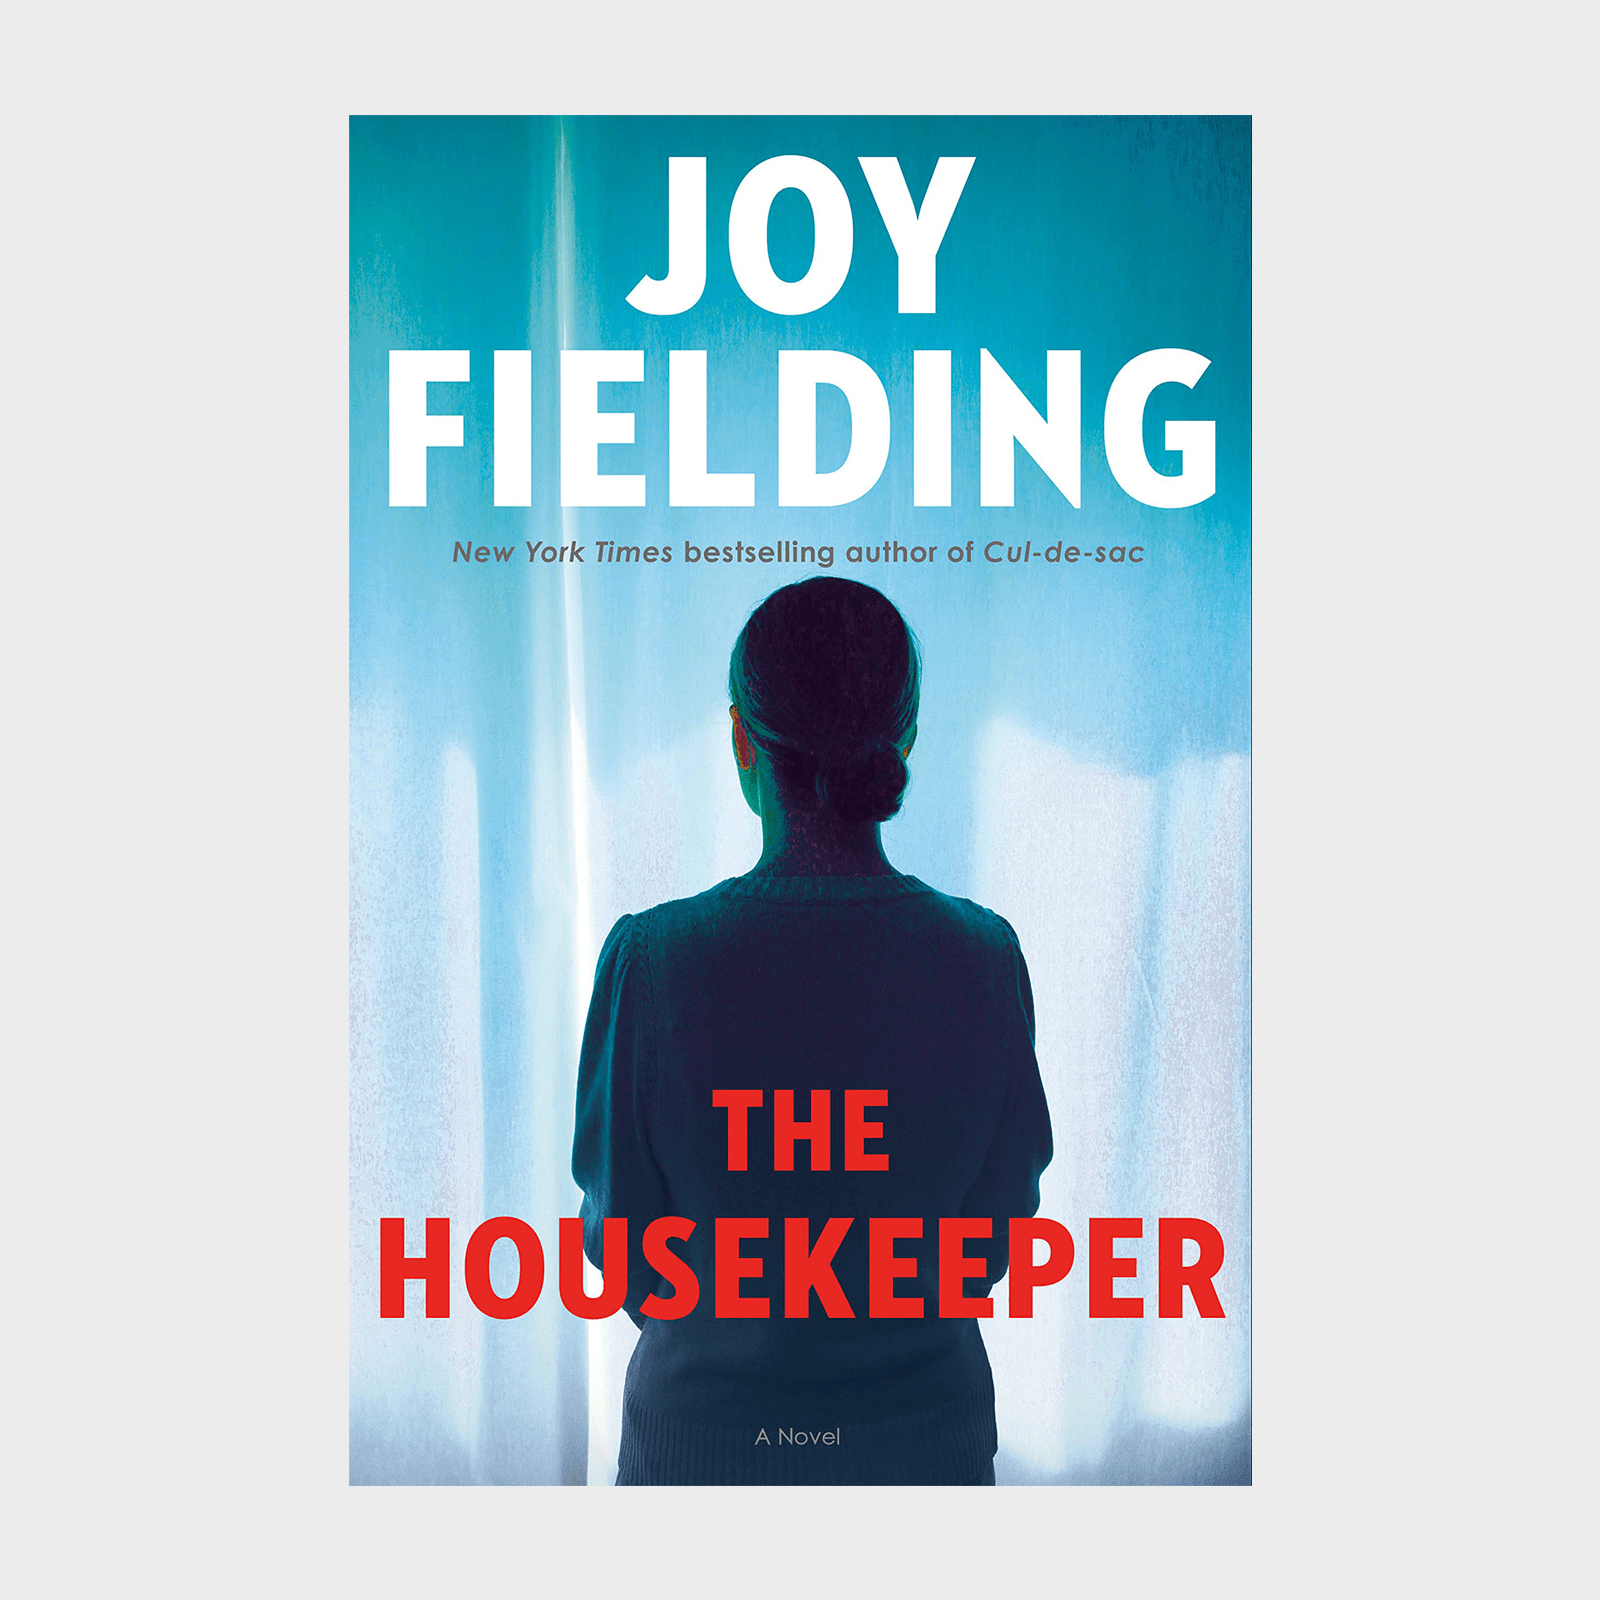 <p class=""><strong>Release date: </strong>Aug. 16, 2022</p> <p><em>New York Times</em> bestselling author Joy Fielding reels us in again with this <a href="https://www.amazon.com/Housekeeper-Novel-Joy-Fielding/dp/059315892X/ref=tmm_hrd_swatch_0?_encoding=UTF8&qid=&sr=" rel="noopener noreferrer">riveting domestic drama</a>. Thriving real estate agent Jodi Bishop knows her aging parents could use a helping hand at home, so she hires a housekeeper. Vibrant and warm, Elyse Woodley seems perfect for the job. But when Jodi's parents seem to deteriorate rapidly while clinging to Elyse's care more than their own daughter's, Jodi has to wonder: Is the housekeeper really there to help her family? Or is something sinister afoot?</p> <p class="listicle-page__cta-button-shop"><a class="shop-btn" href="https://www.amazon.com/Housekeeper-Novel-Joy-Fielding/dp/059315892X/ref=tmm_hrd_swatch_0?_encoding=UTF8&qid=&sr=">Shop Now</a></p>